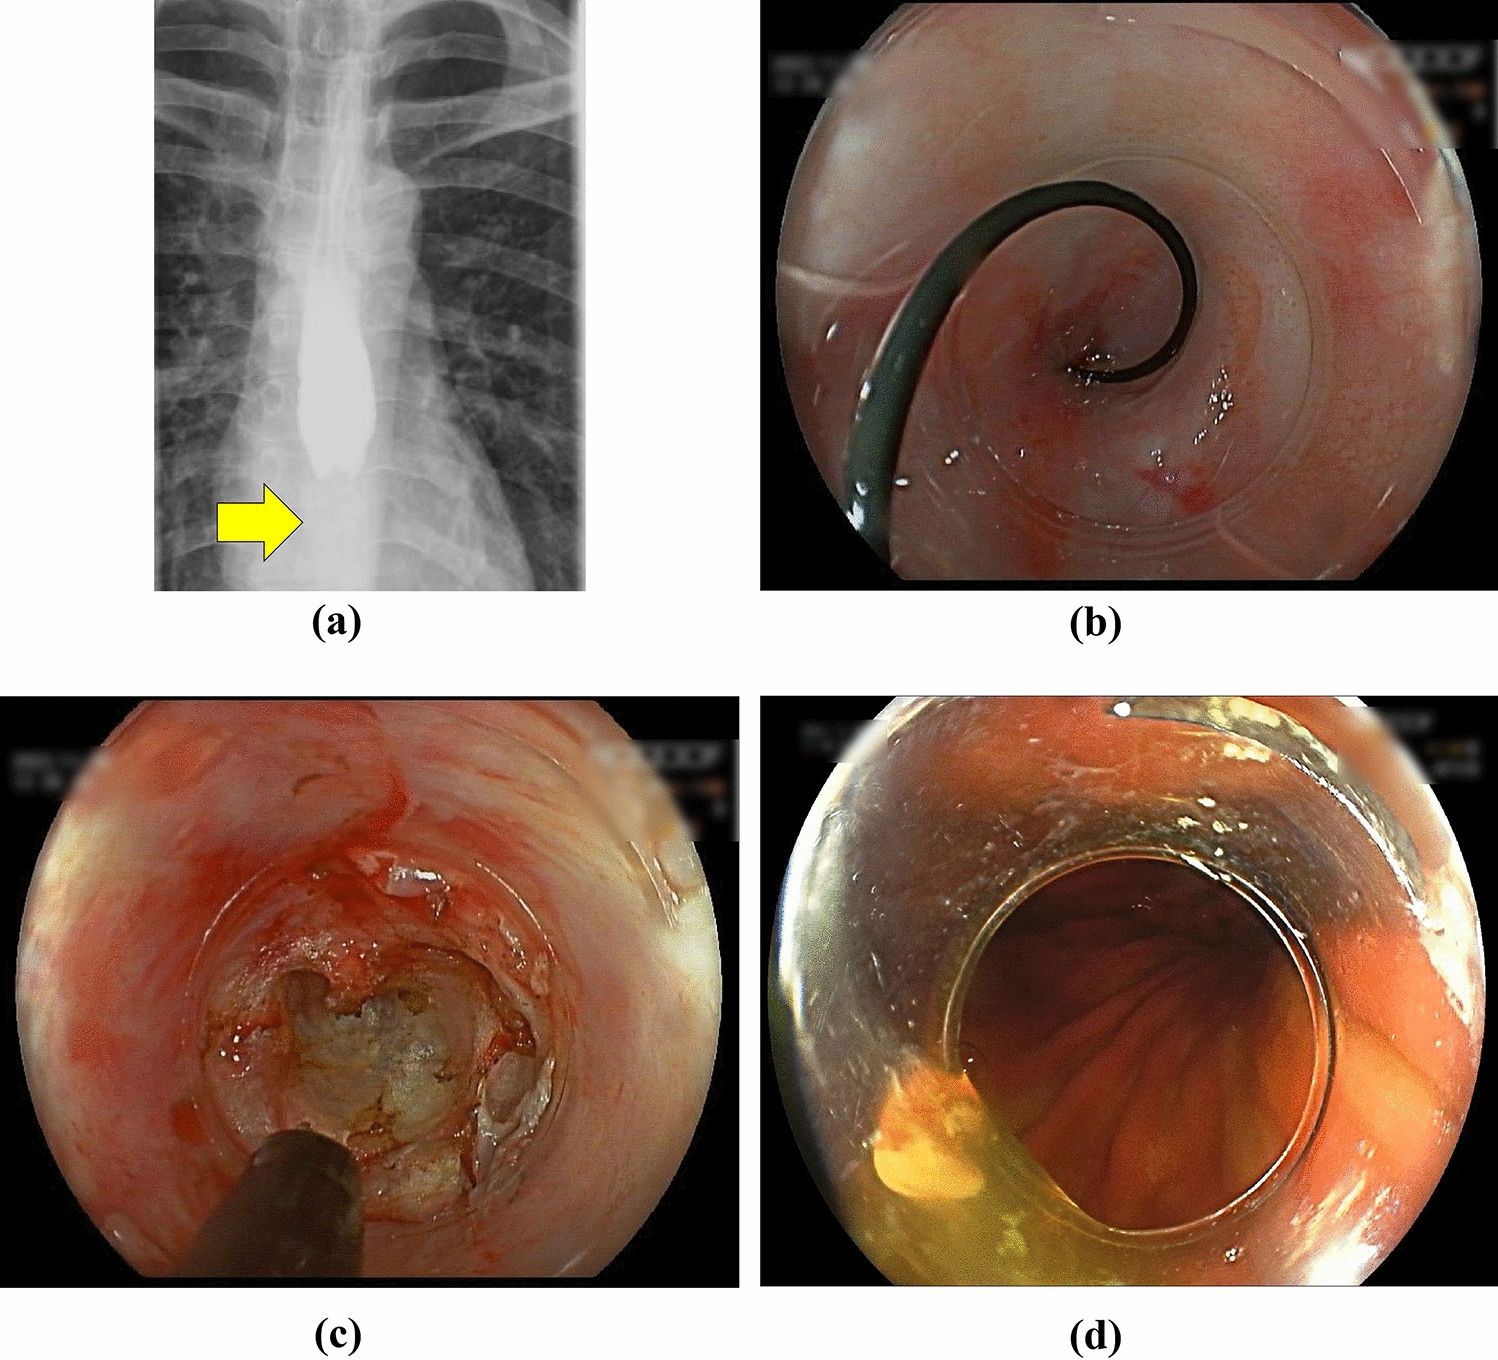 Endoscopic Longitudinal Incision and Recanalization in the Treatment of Acquired Esophageal Atresia (with Video)